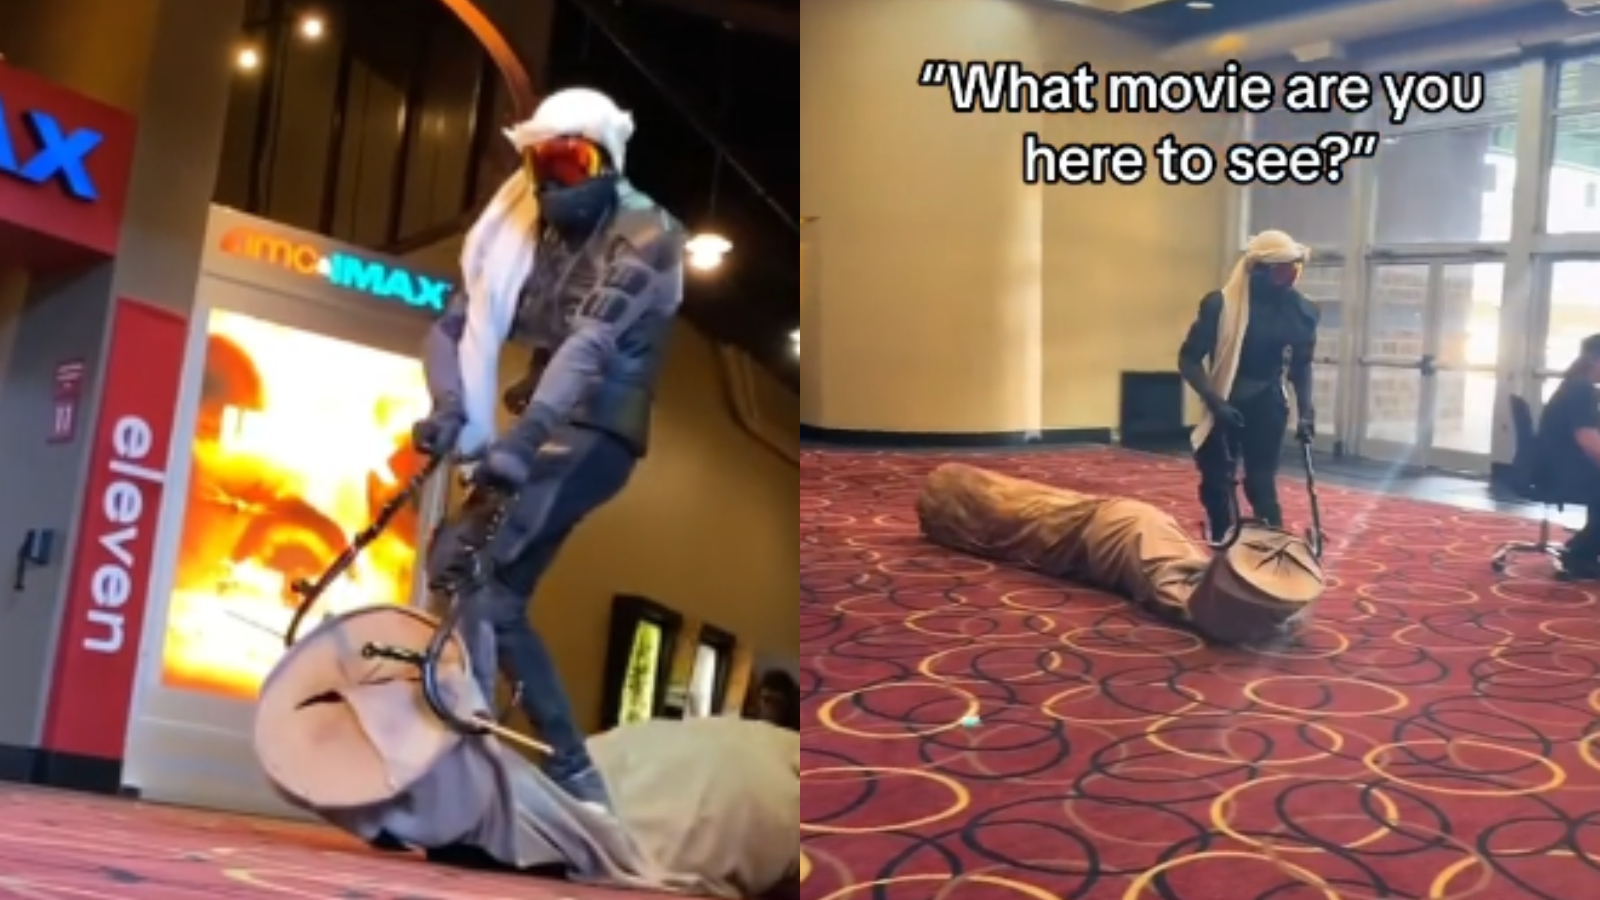 Dune 2 cosplayer goes viral riding sandworm into AMC theater - Dexerto